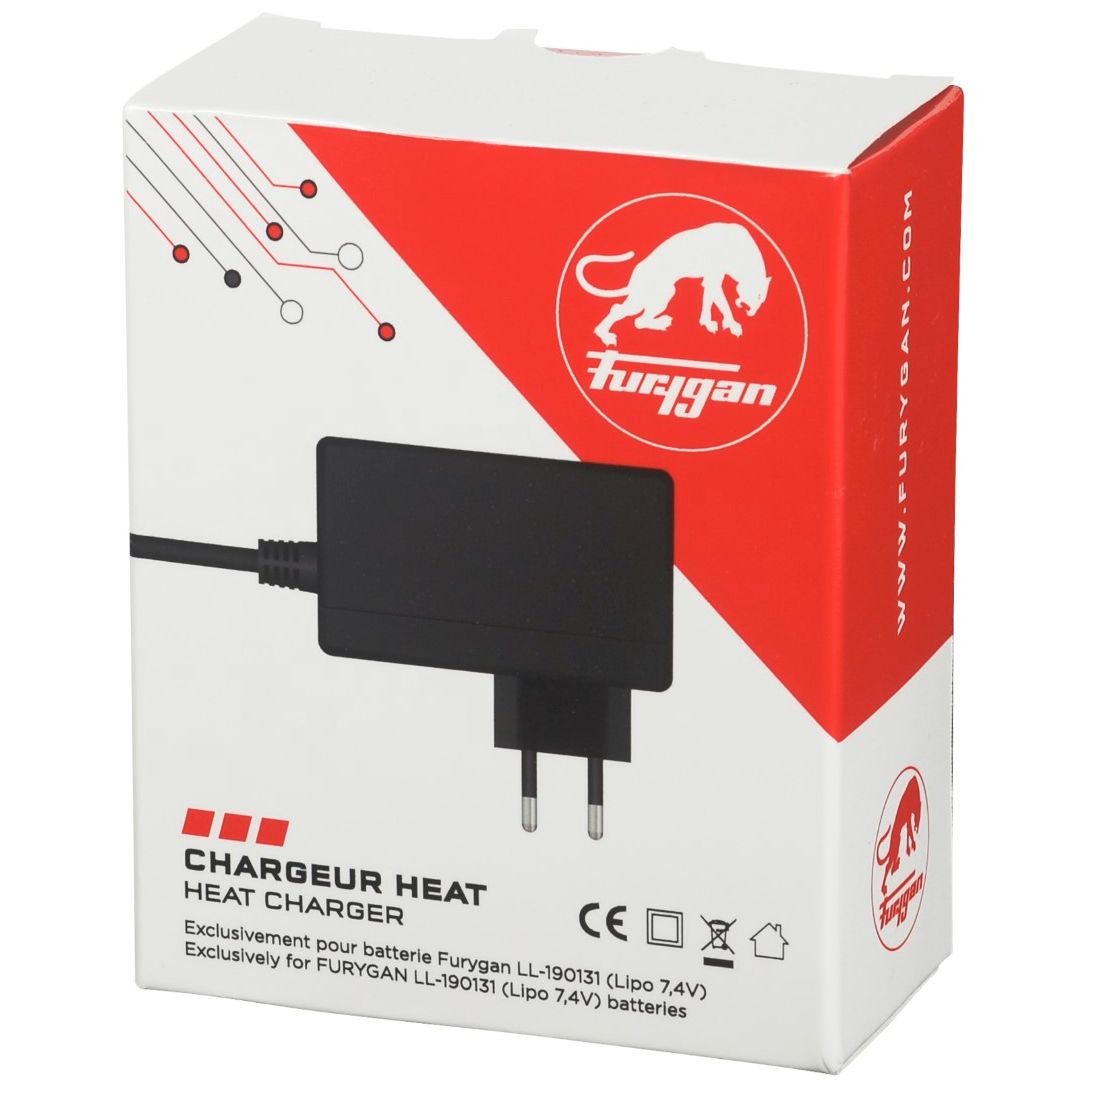 Image of Chargeur Furygan HEAT CHARGER